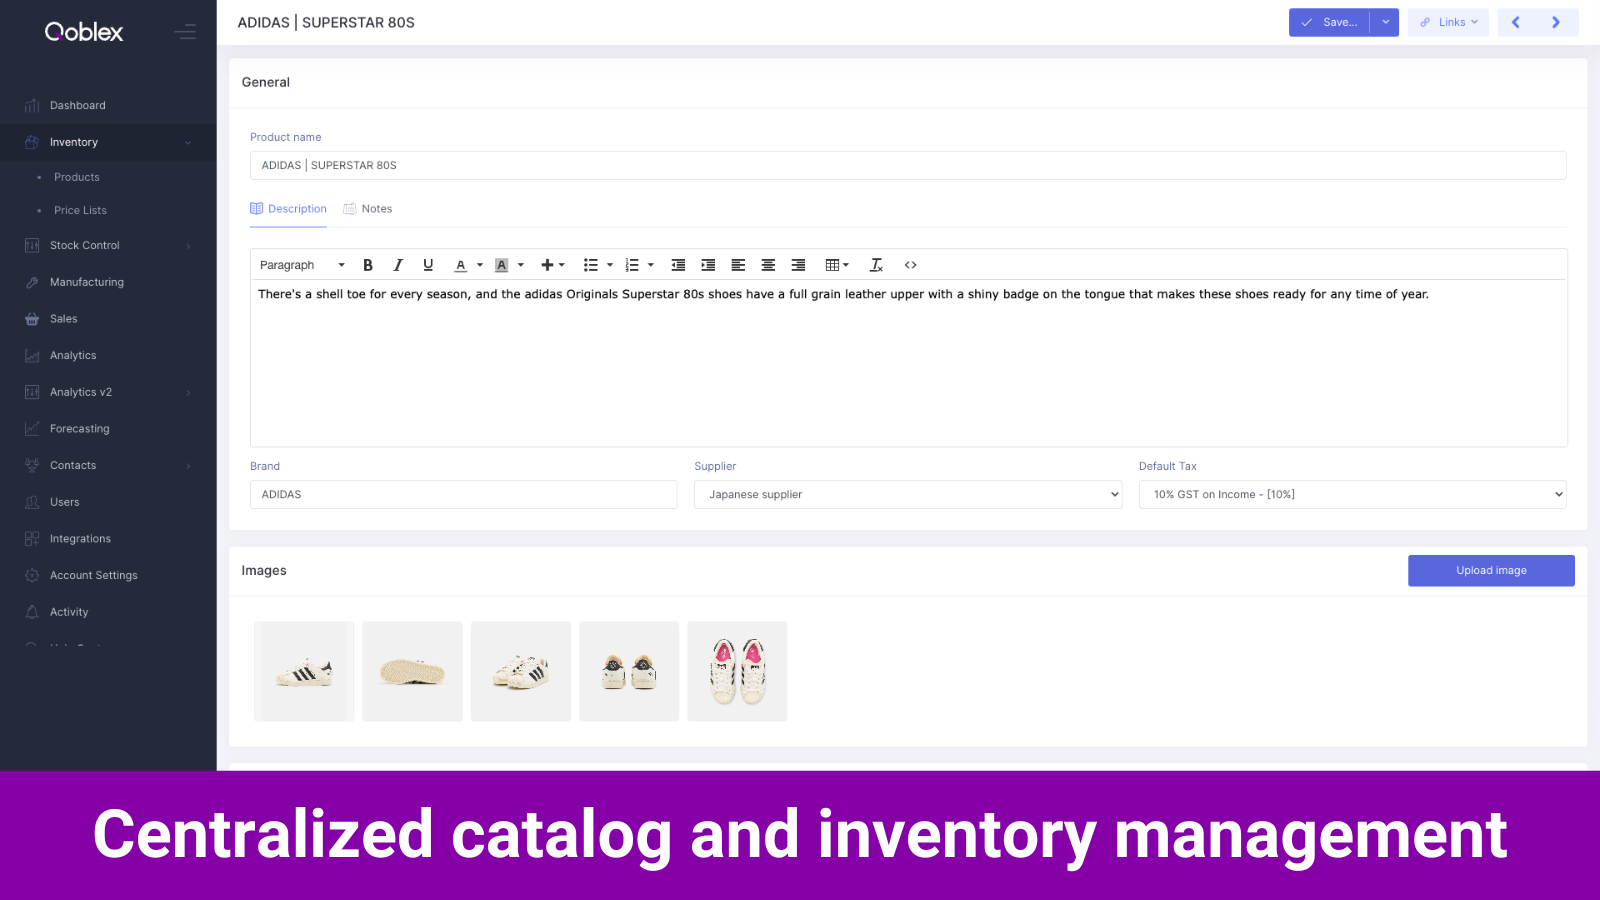 Centralized catalog and inventory management